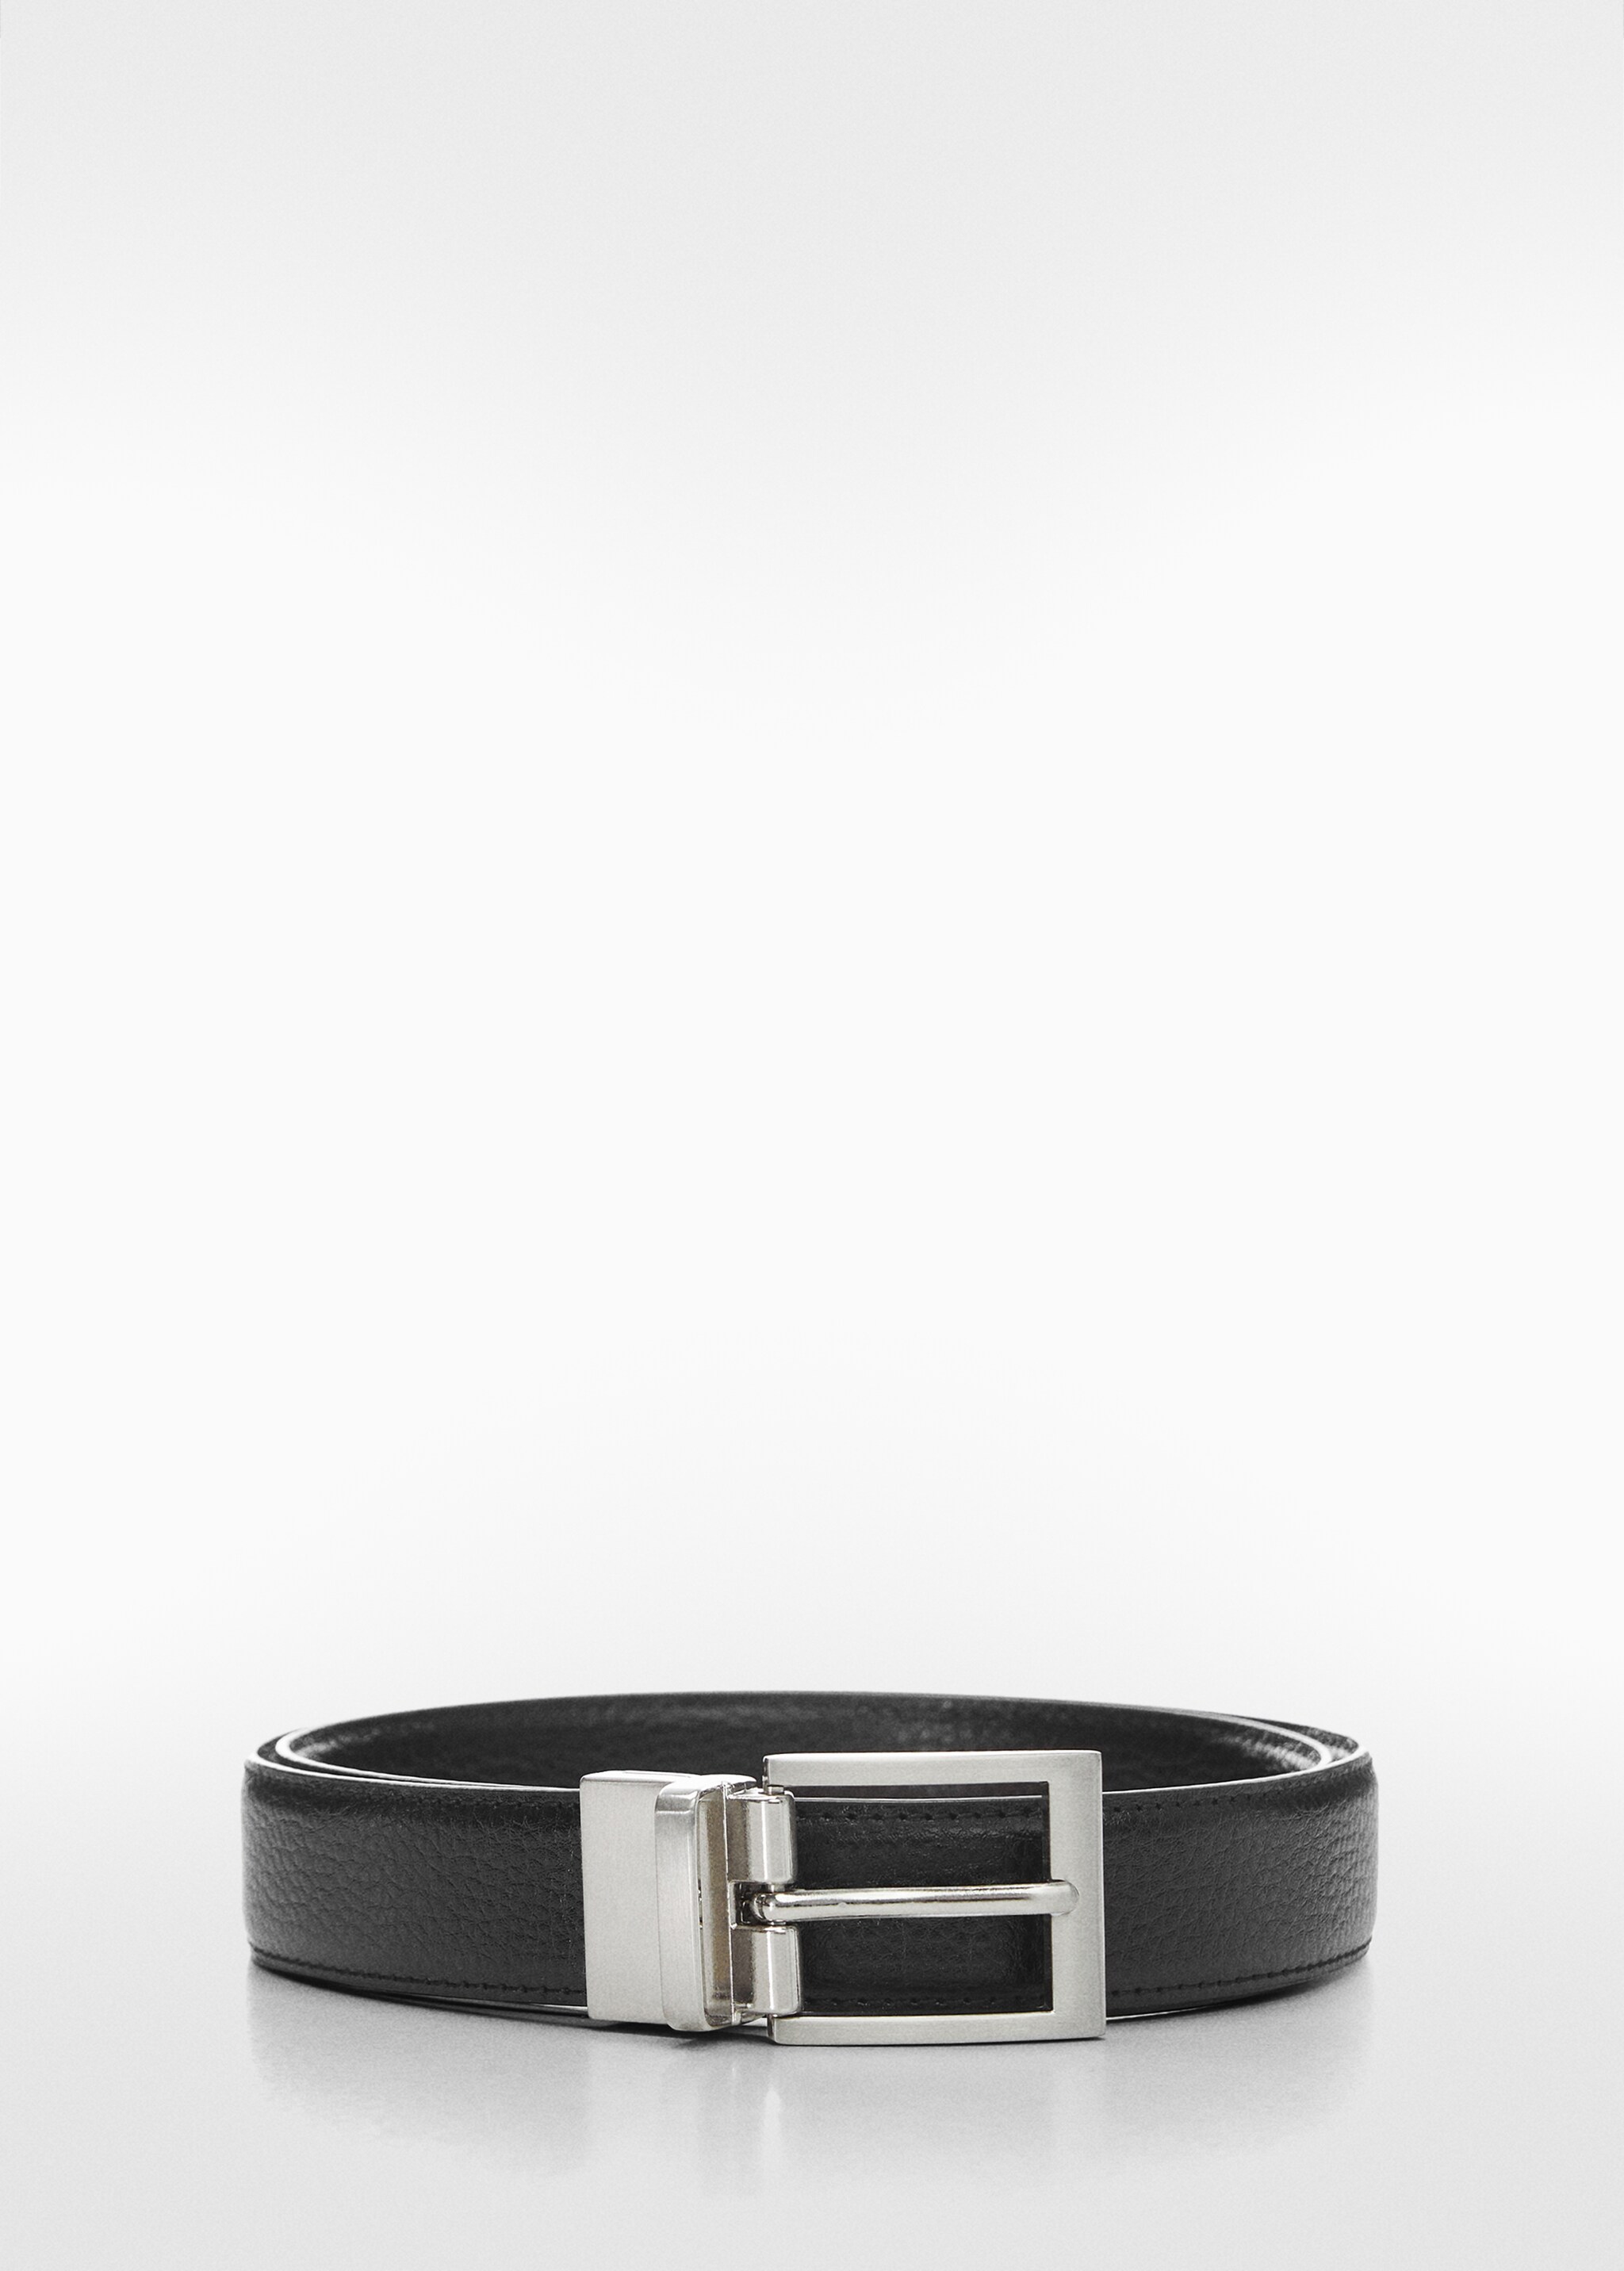 Pebbled leather belt - Article without model